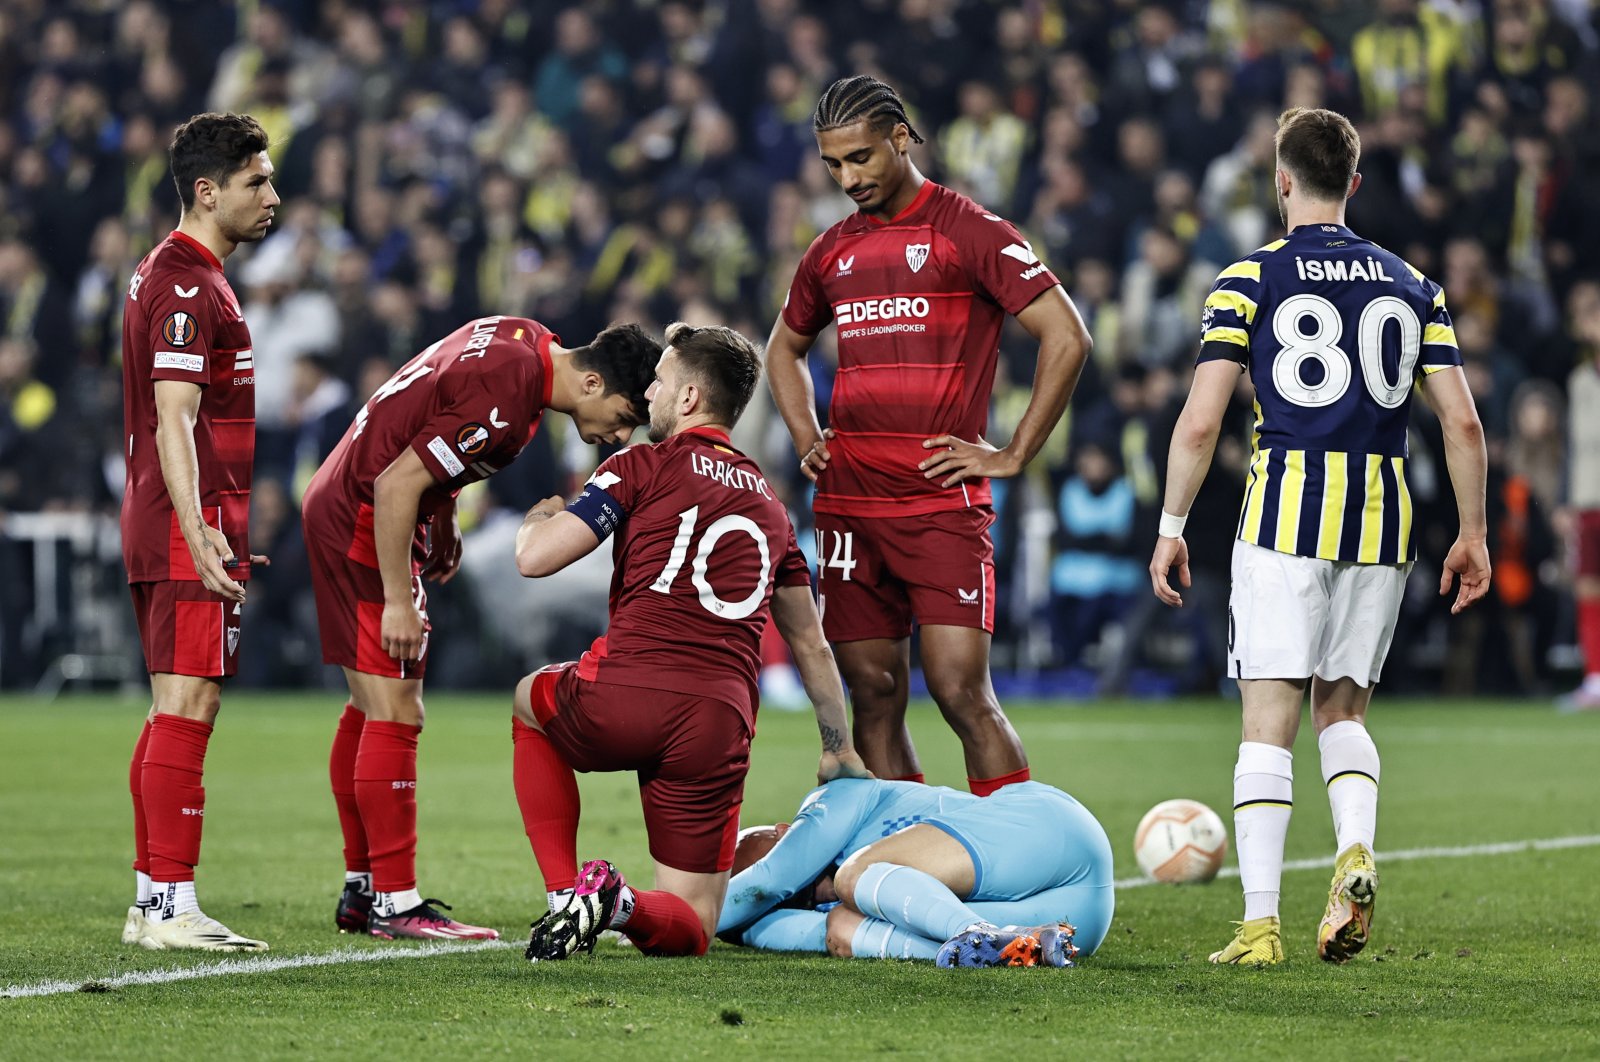 Sevilla players surround goalkeeper Marko Dmitrovic on the ground after he was hit by a foreign object during a Europa tie against Fenerbahçe, Istanbul, Türkiye, March 16, 2023. (AA Photo)